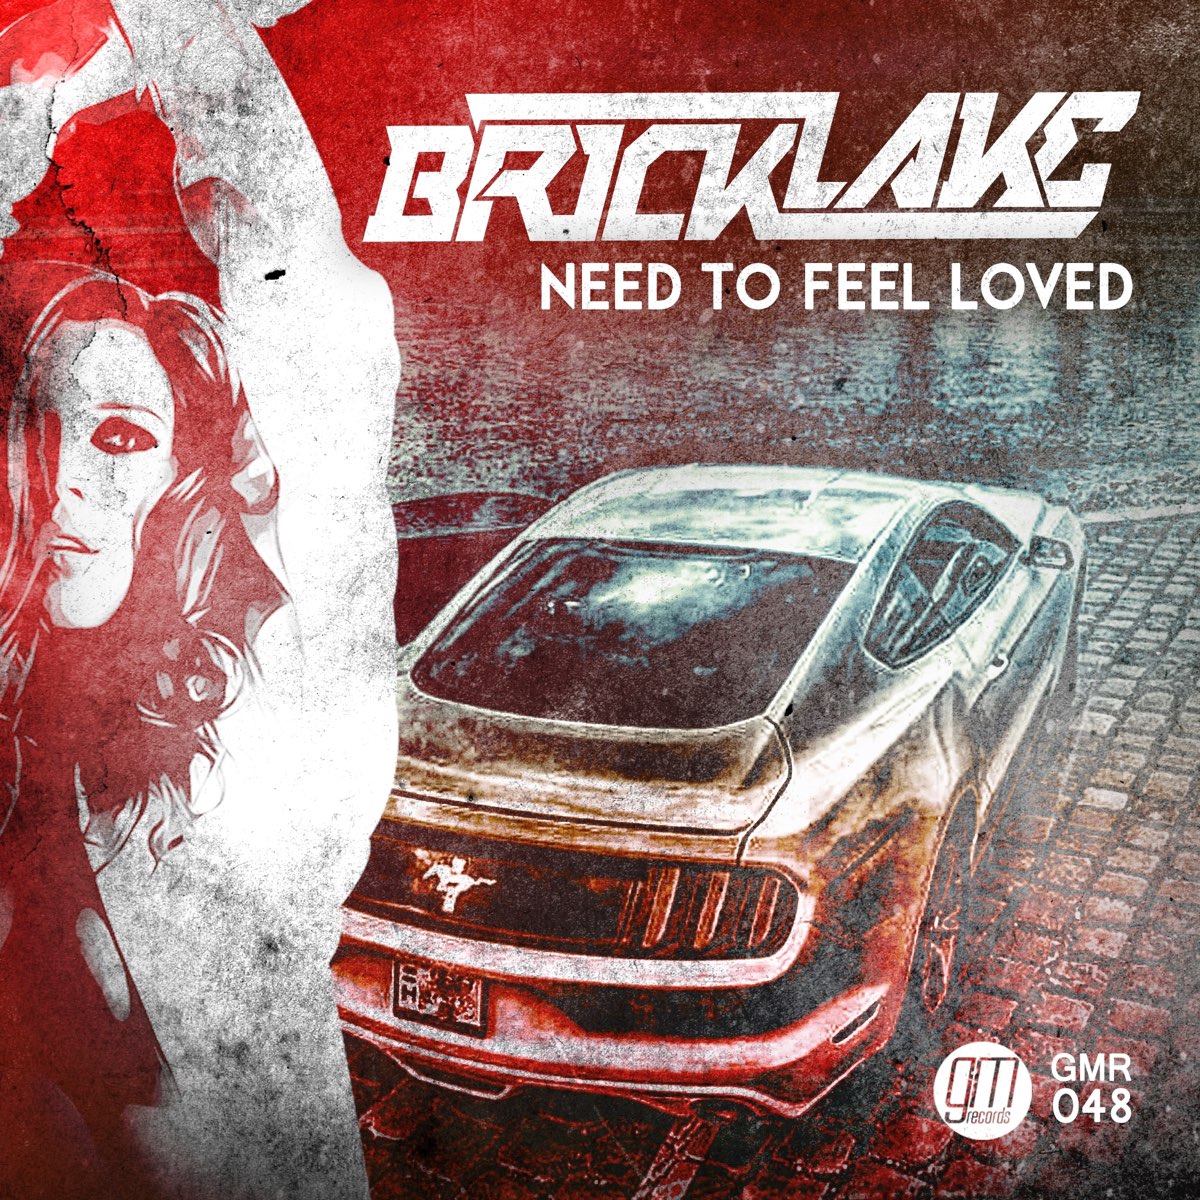 Need to feel loved feat delline. Need to feel Loved. Adam k Soha need to feel Loved. Reflekt need to feel Loved. Need to feel Loved Original Mix.